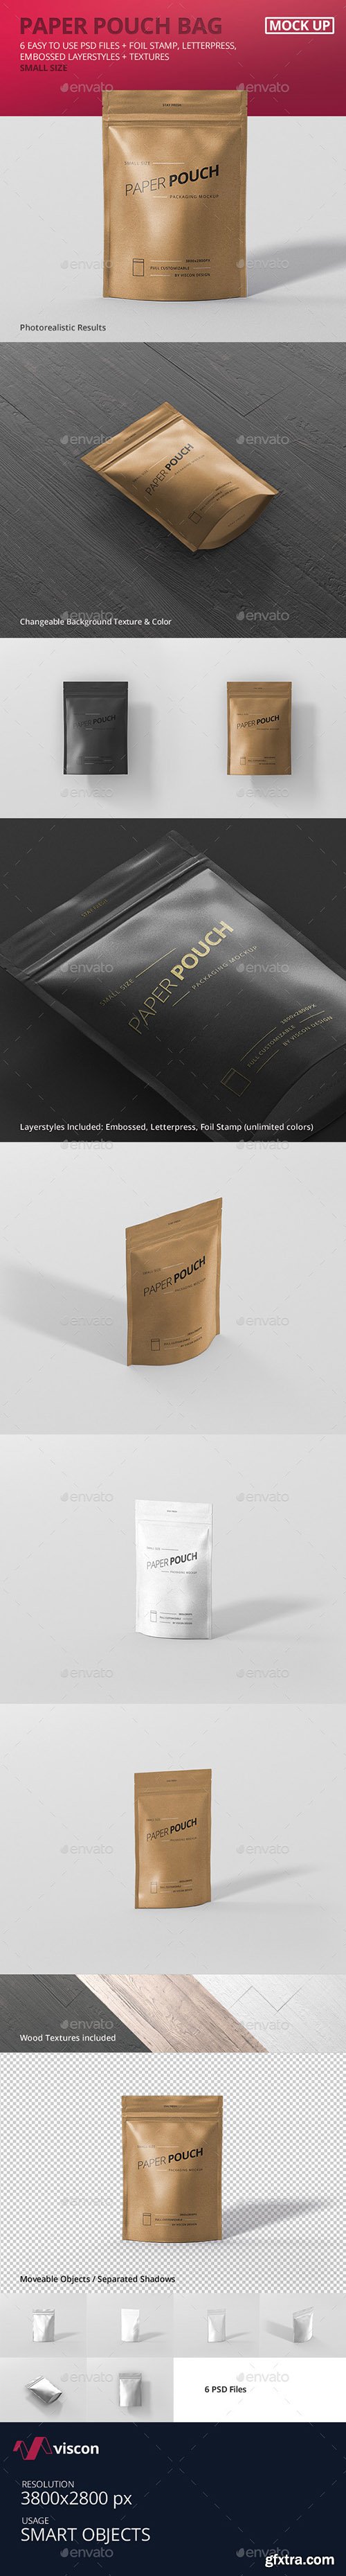 Graphicriver Paper Pouch Bag Mockup Small Size 19389708